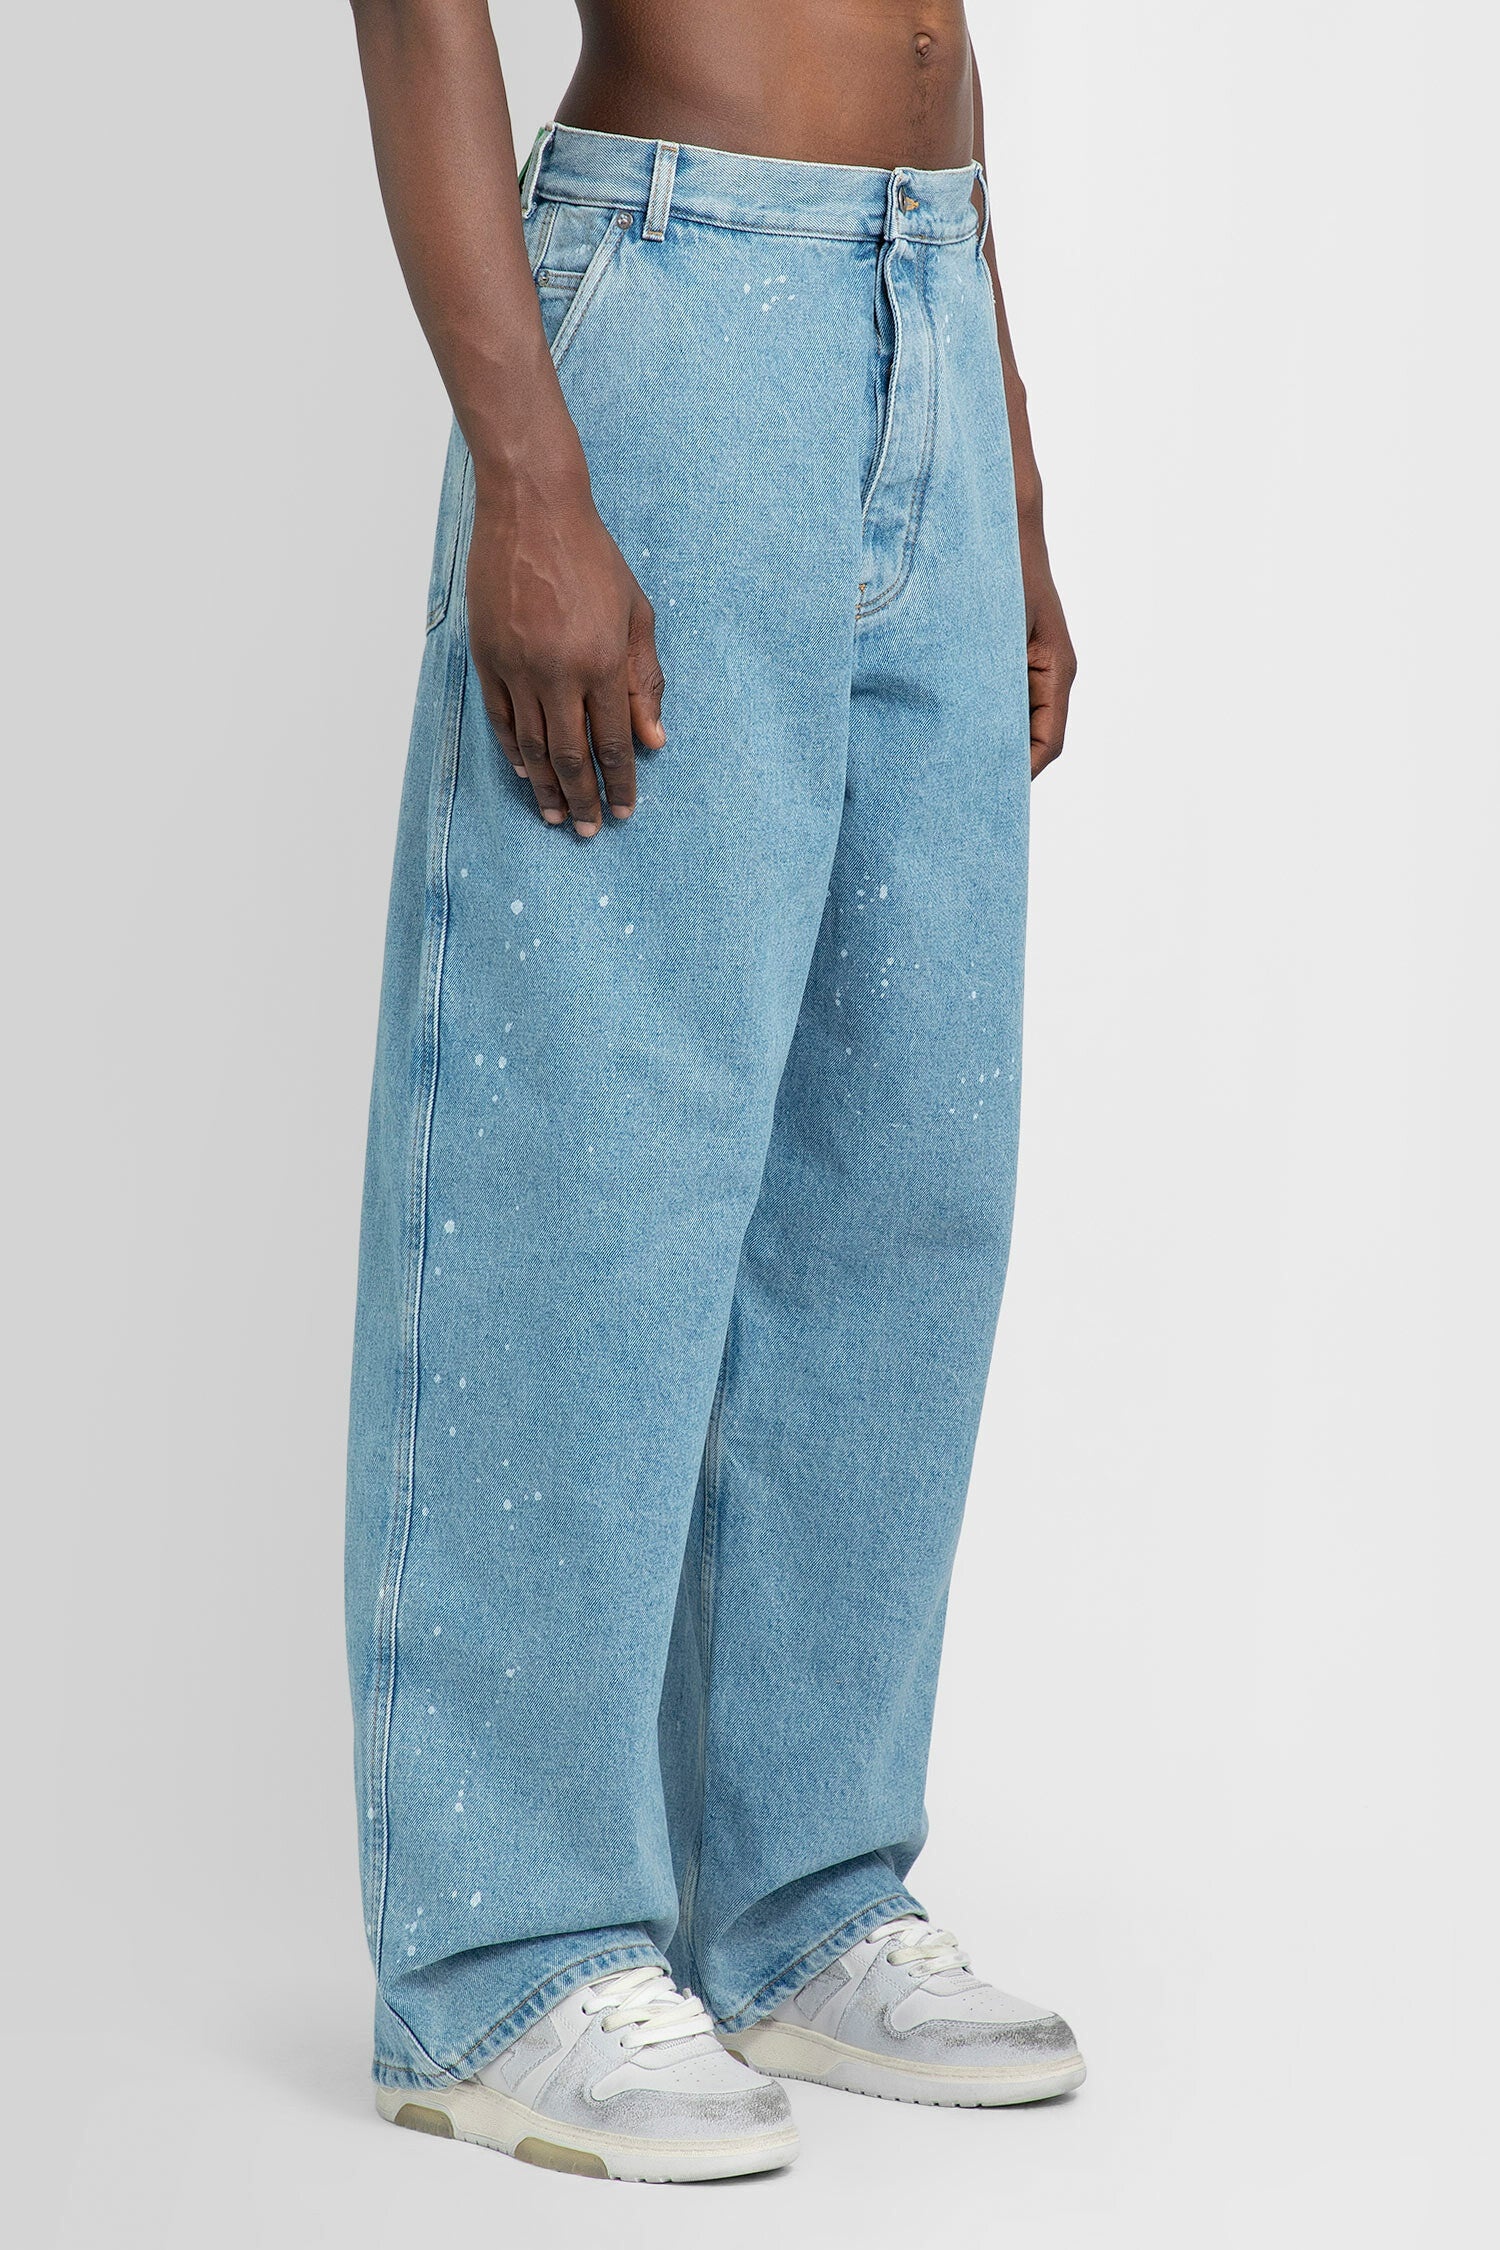 OFF-WHITE MAN BLUE JEANS - 3